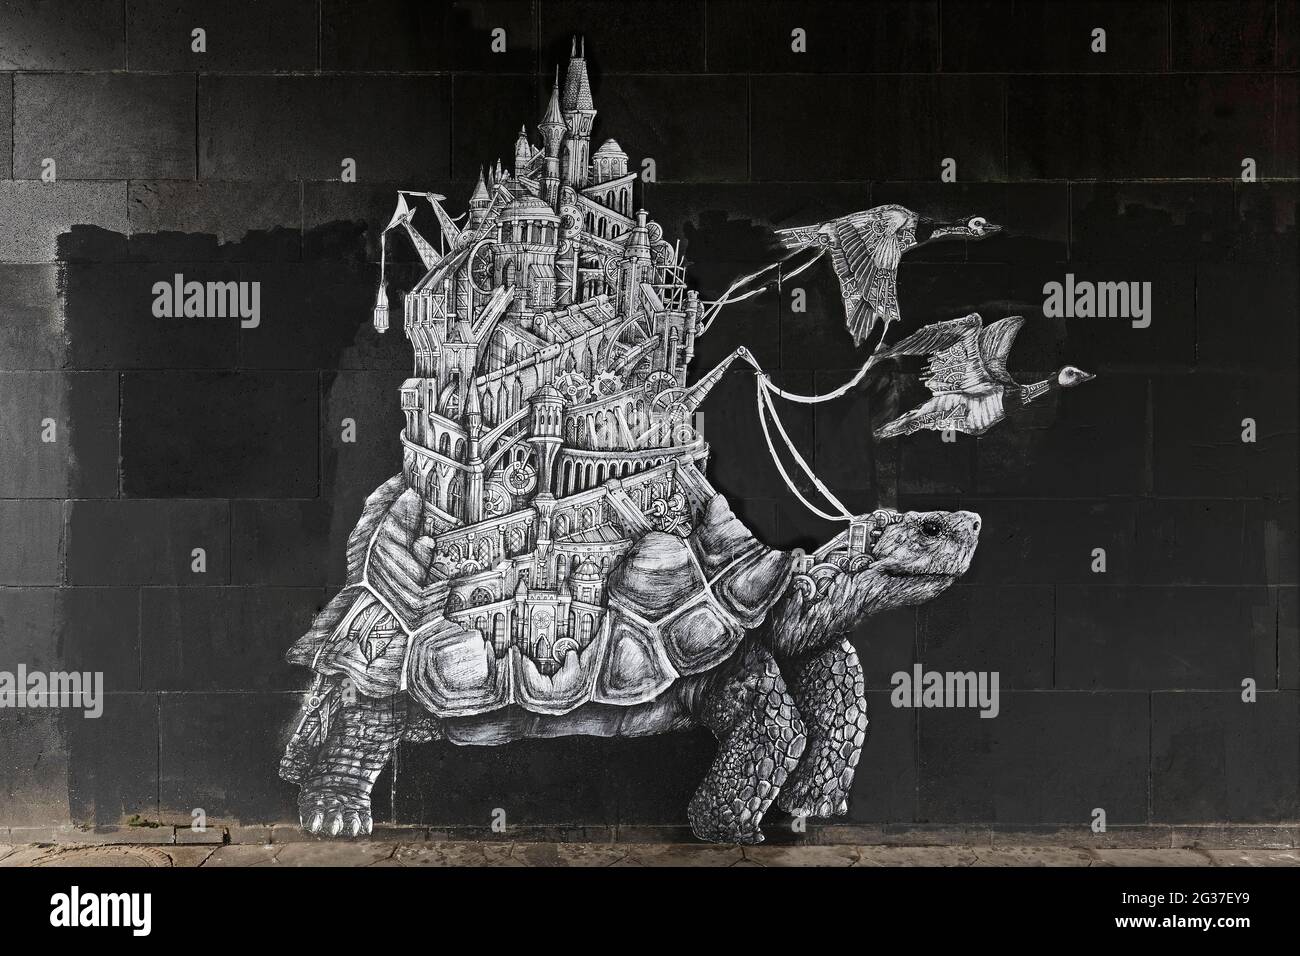 Paste up, turtle carries machine city on shell, symbol for balance of nature and technology, surreal picture, mechanimal by streetart artist Ardif Stock Photo